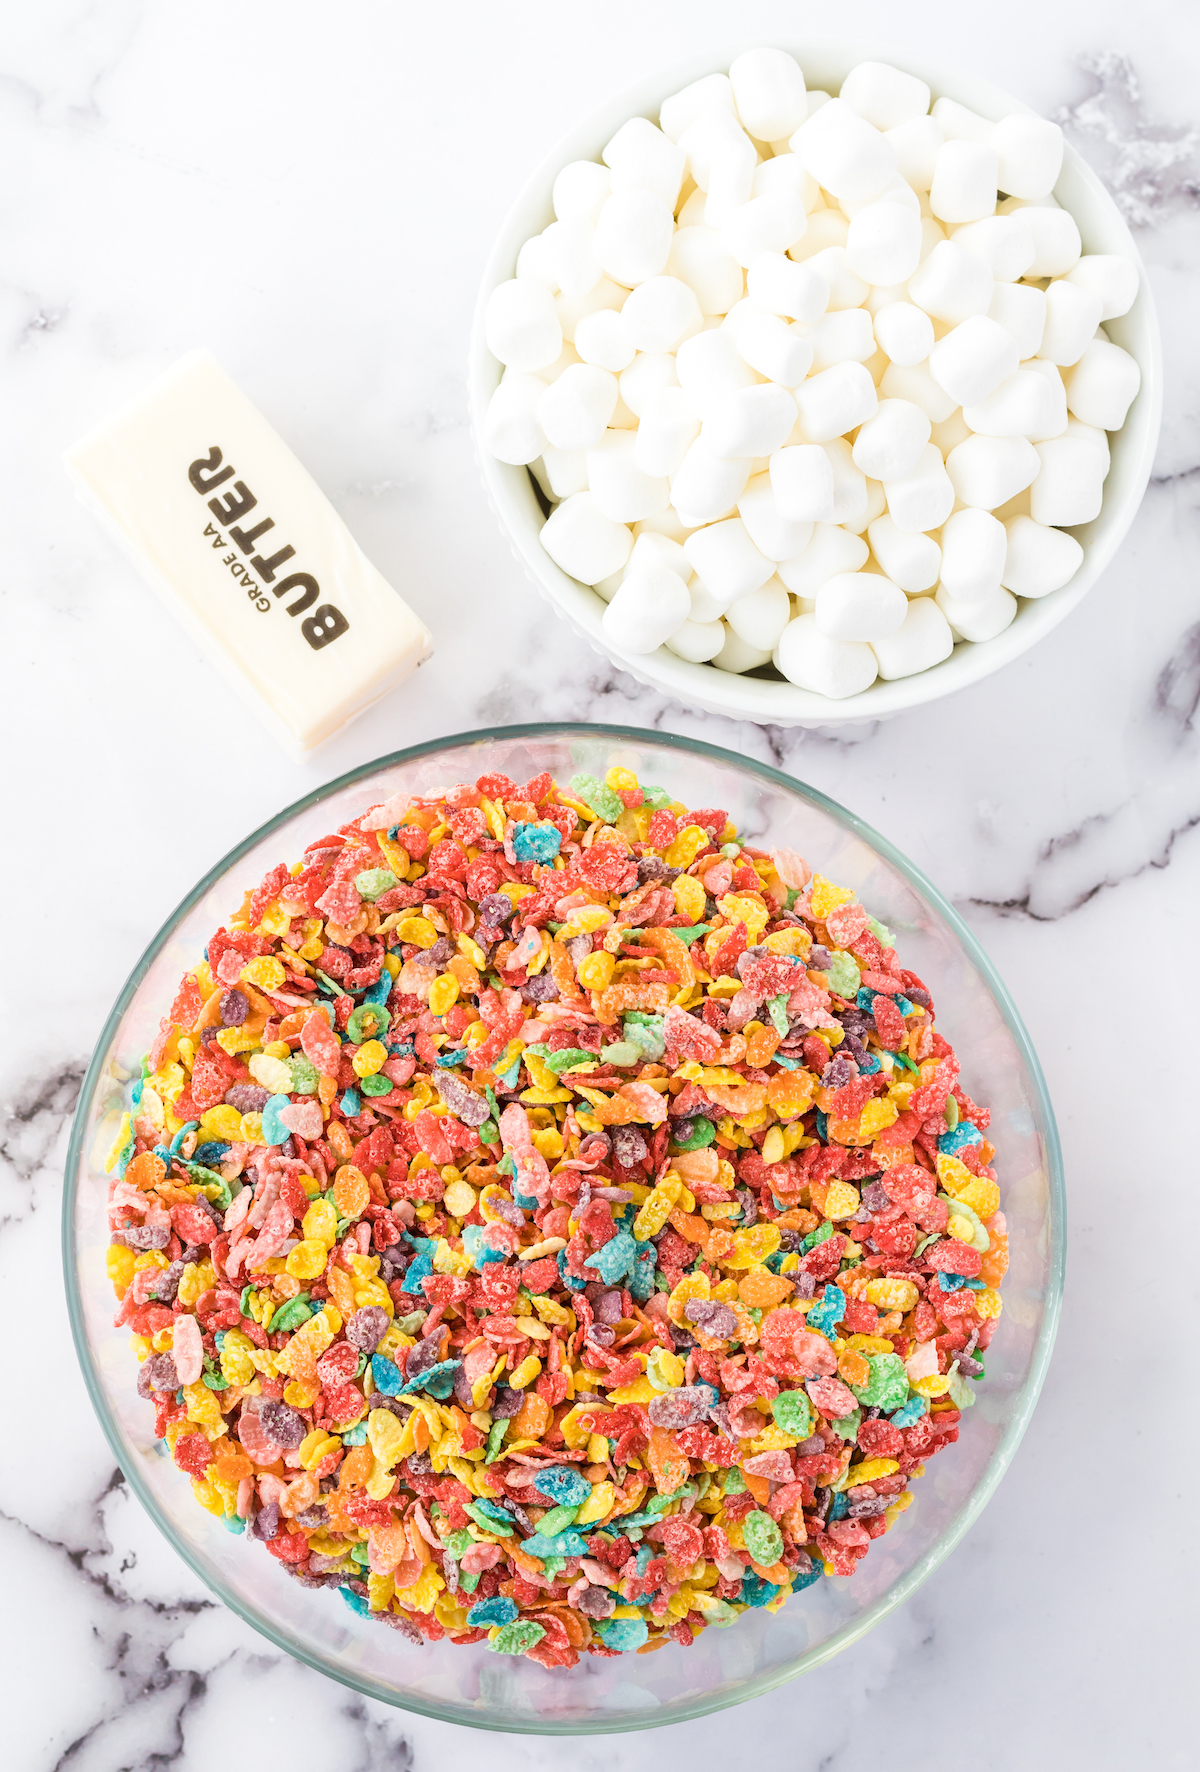 Two prep bowls one filled with fruity pebbles and the other mini marshmallows sitting next to a stick of butter.